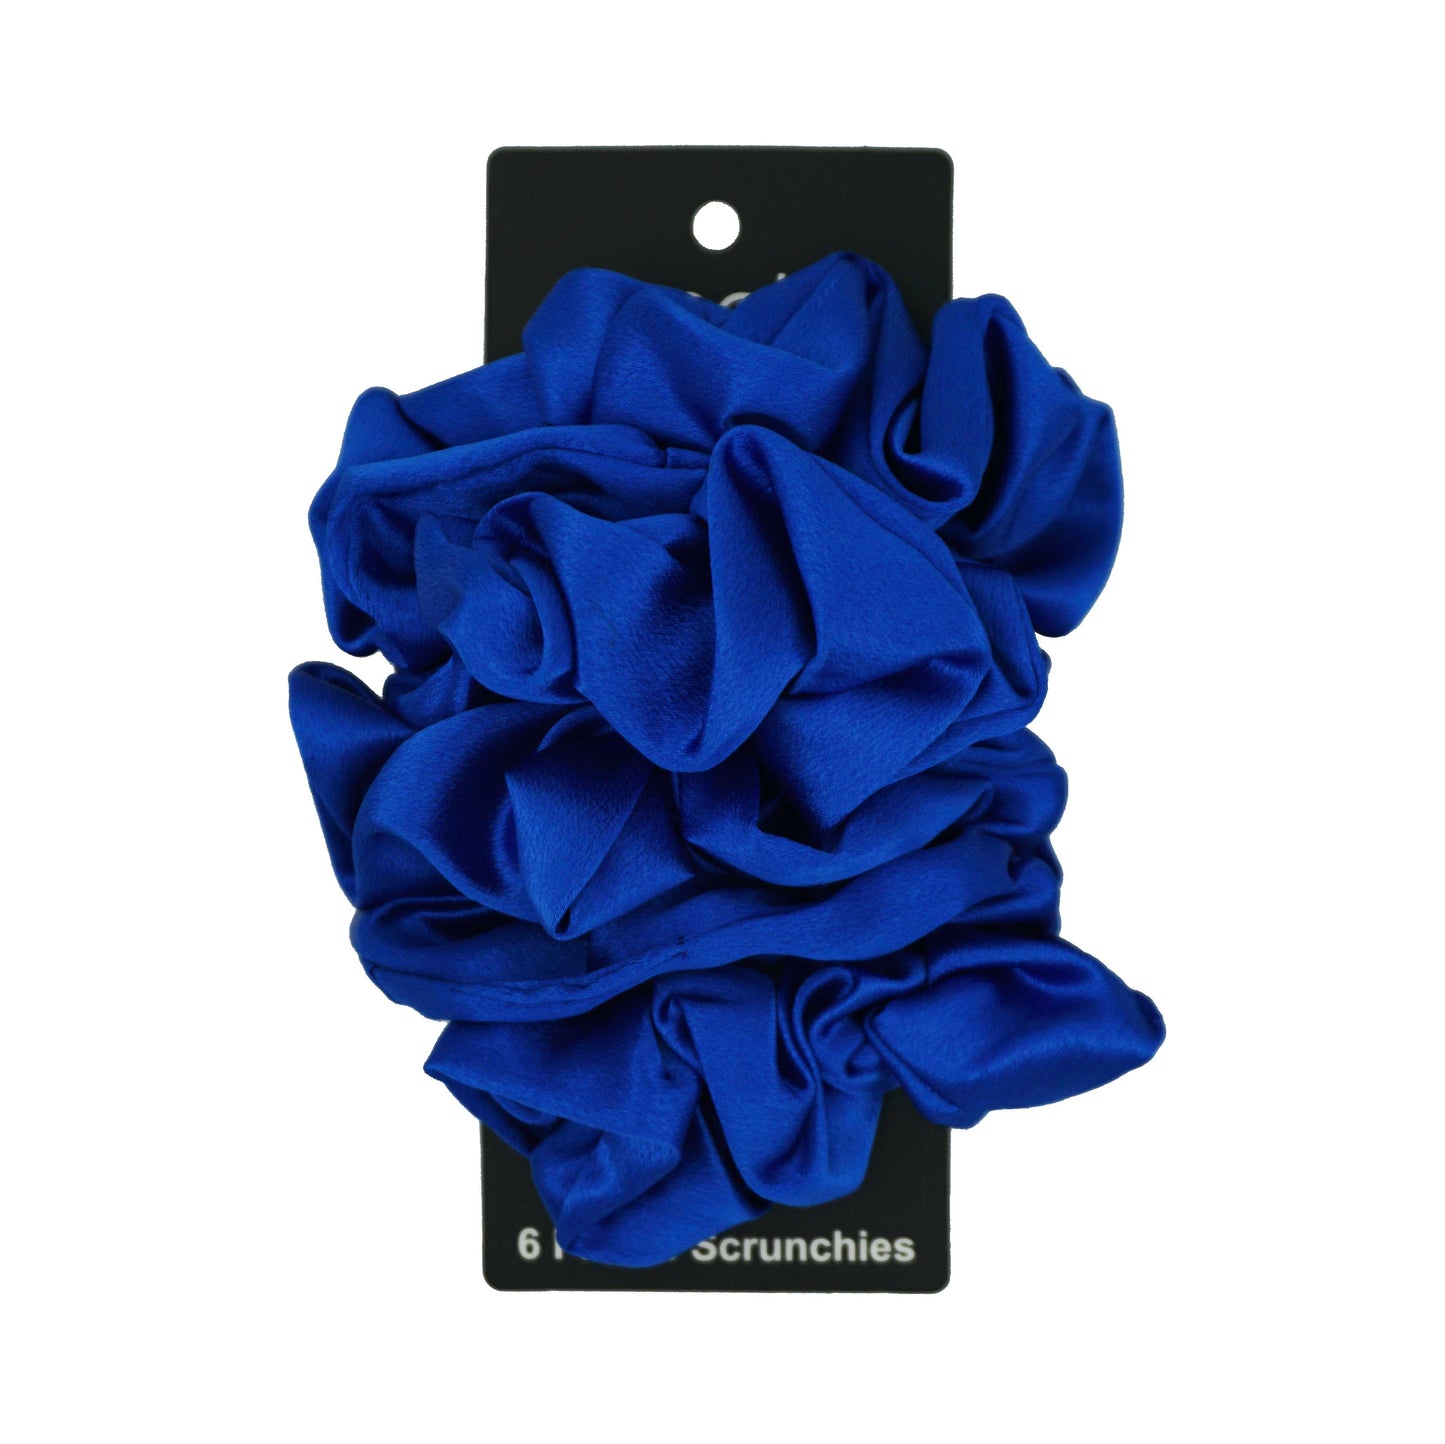 Amelia Beauty Products, Blue Imitation Silk Scrunchies, 4.5in Diameter, Gentle on Hair, Strong Hold, No Snag, No Dents or Creases. 6 Pack